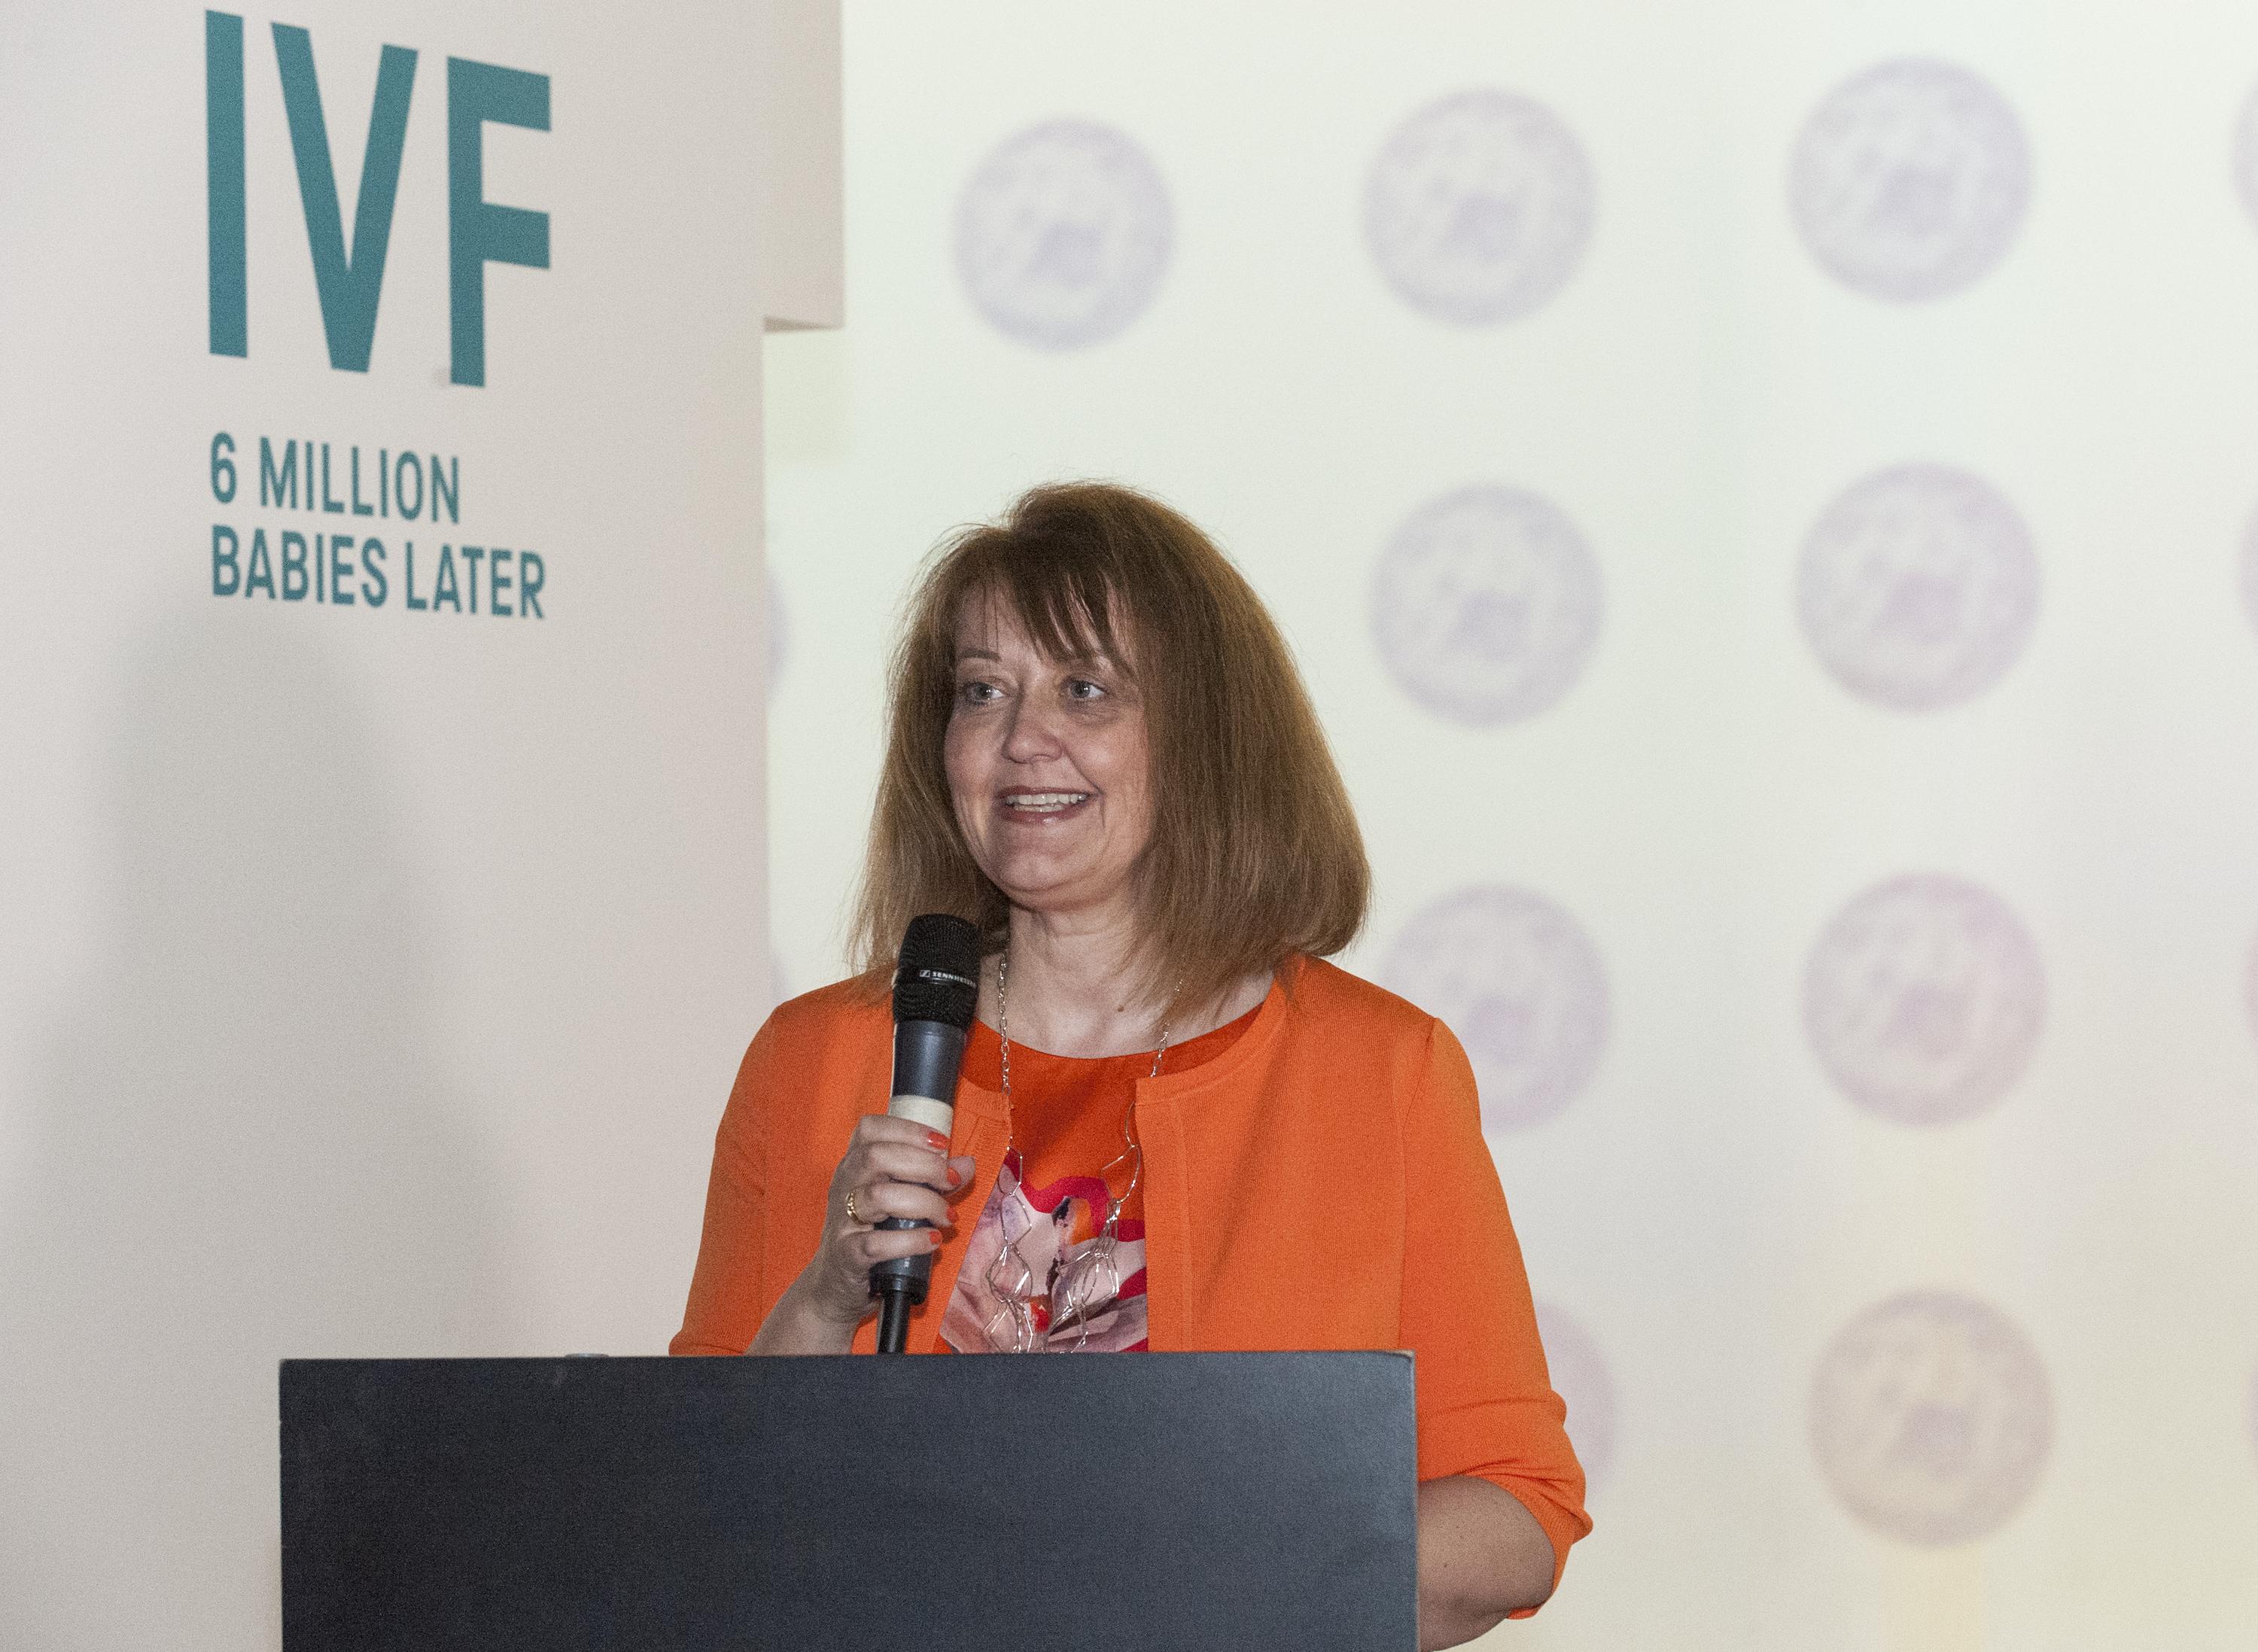 Our Chair Sally Cheshire CBE speaking at the launch of the IVF: 6 million babies later exhibition at the Science Museum.